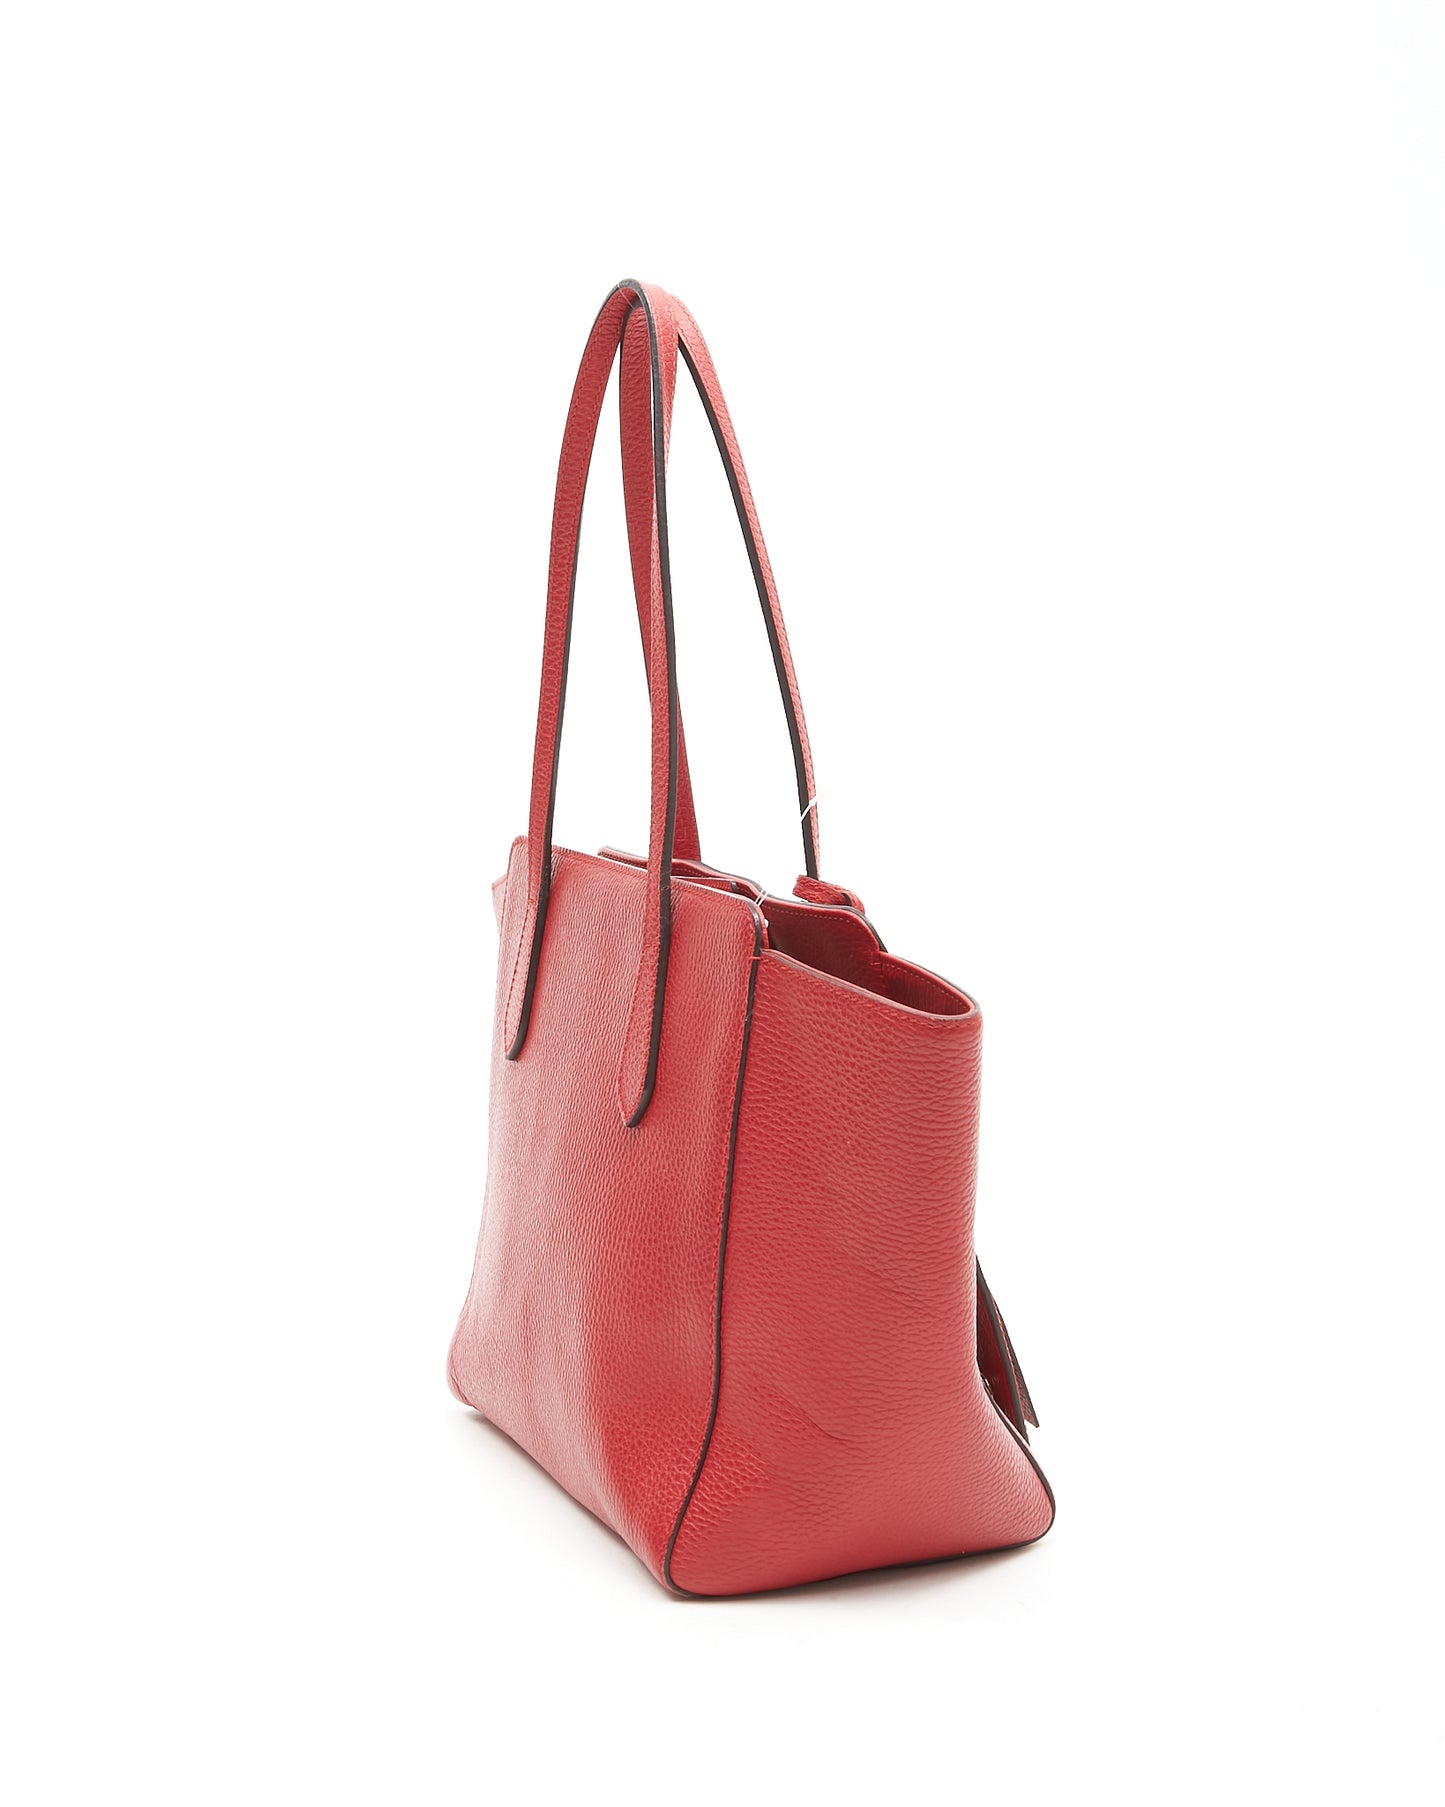 Gucci Red Pebbled Leather Small Swing Tote Bag